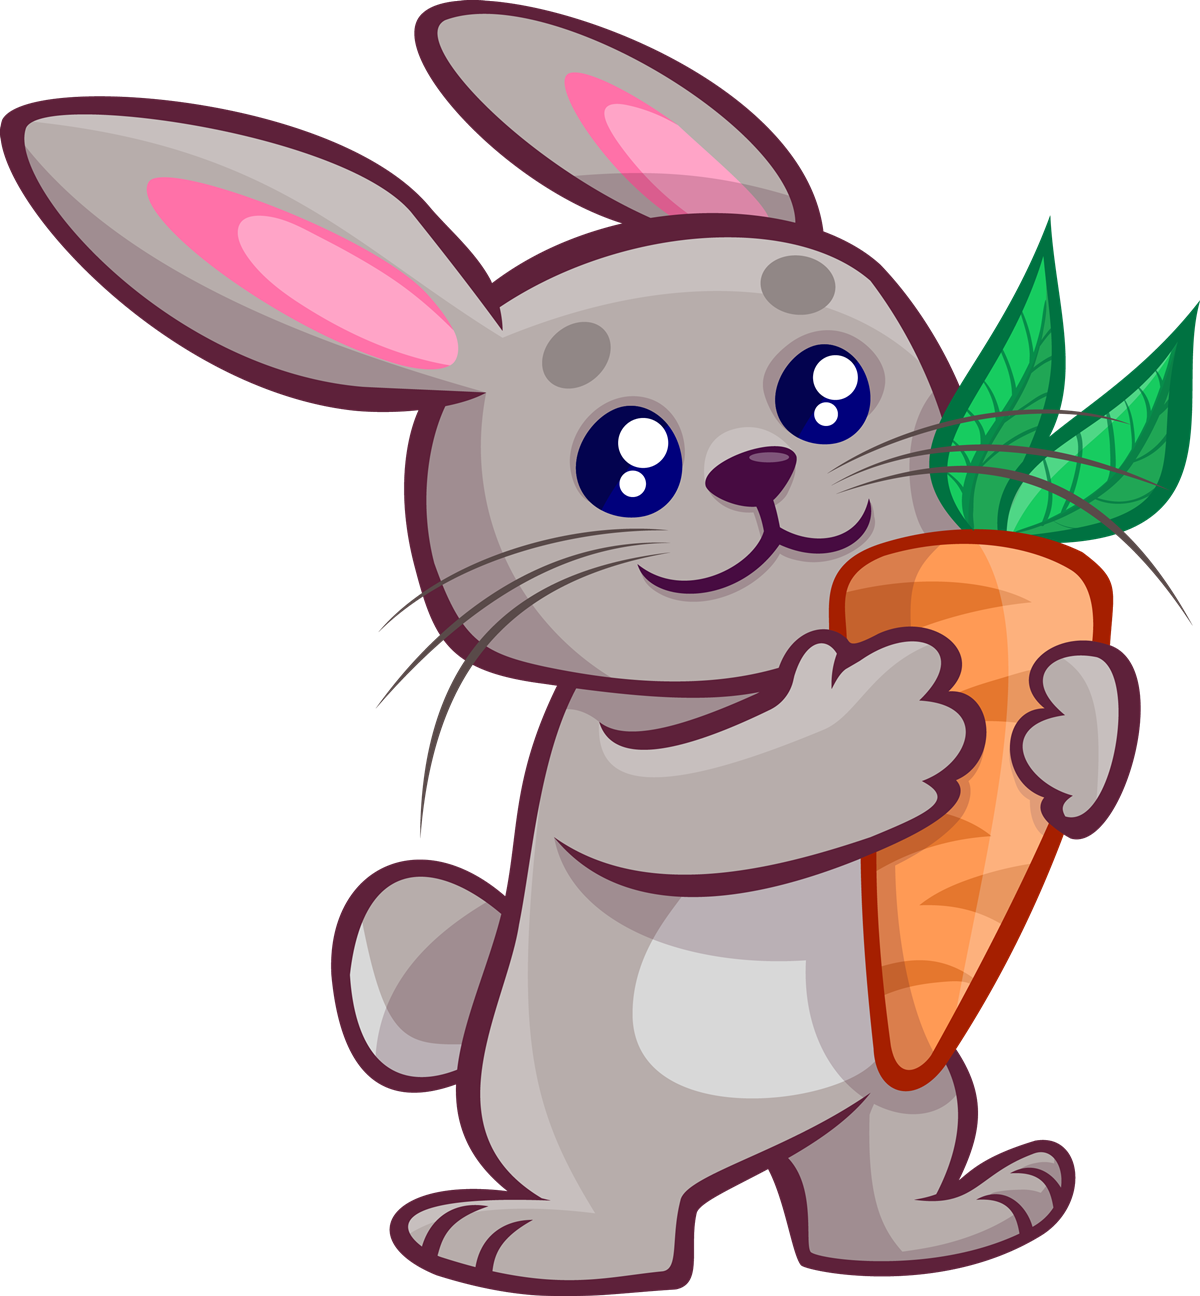 Easter Bunny Face Clipart | Free download on ClipArtMag